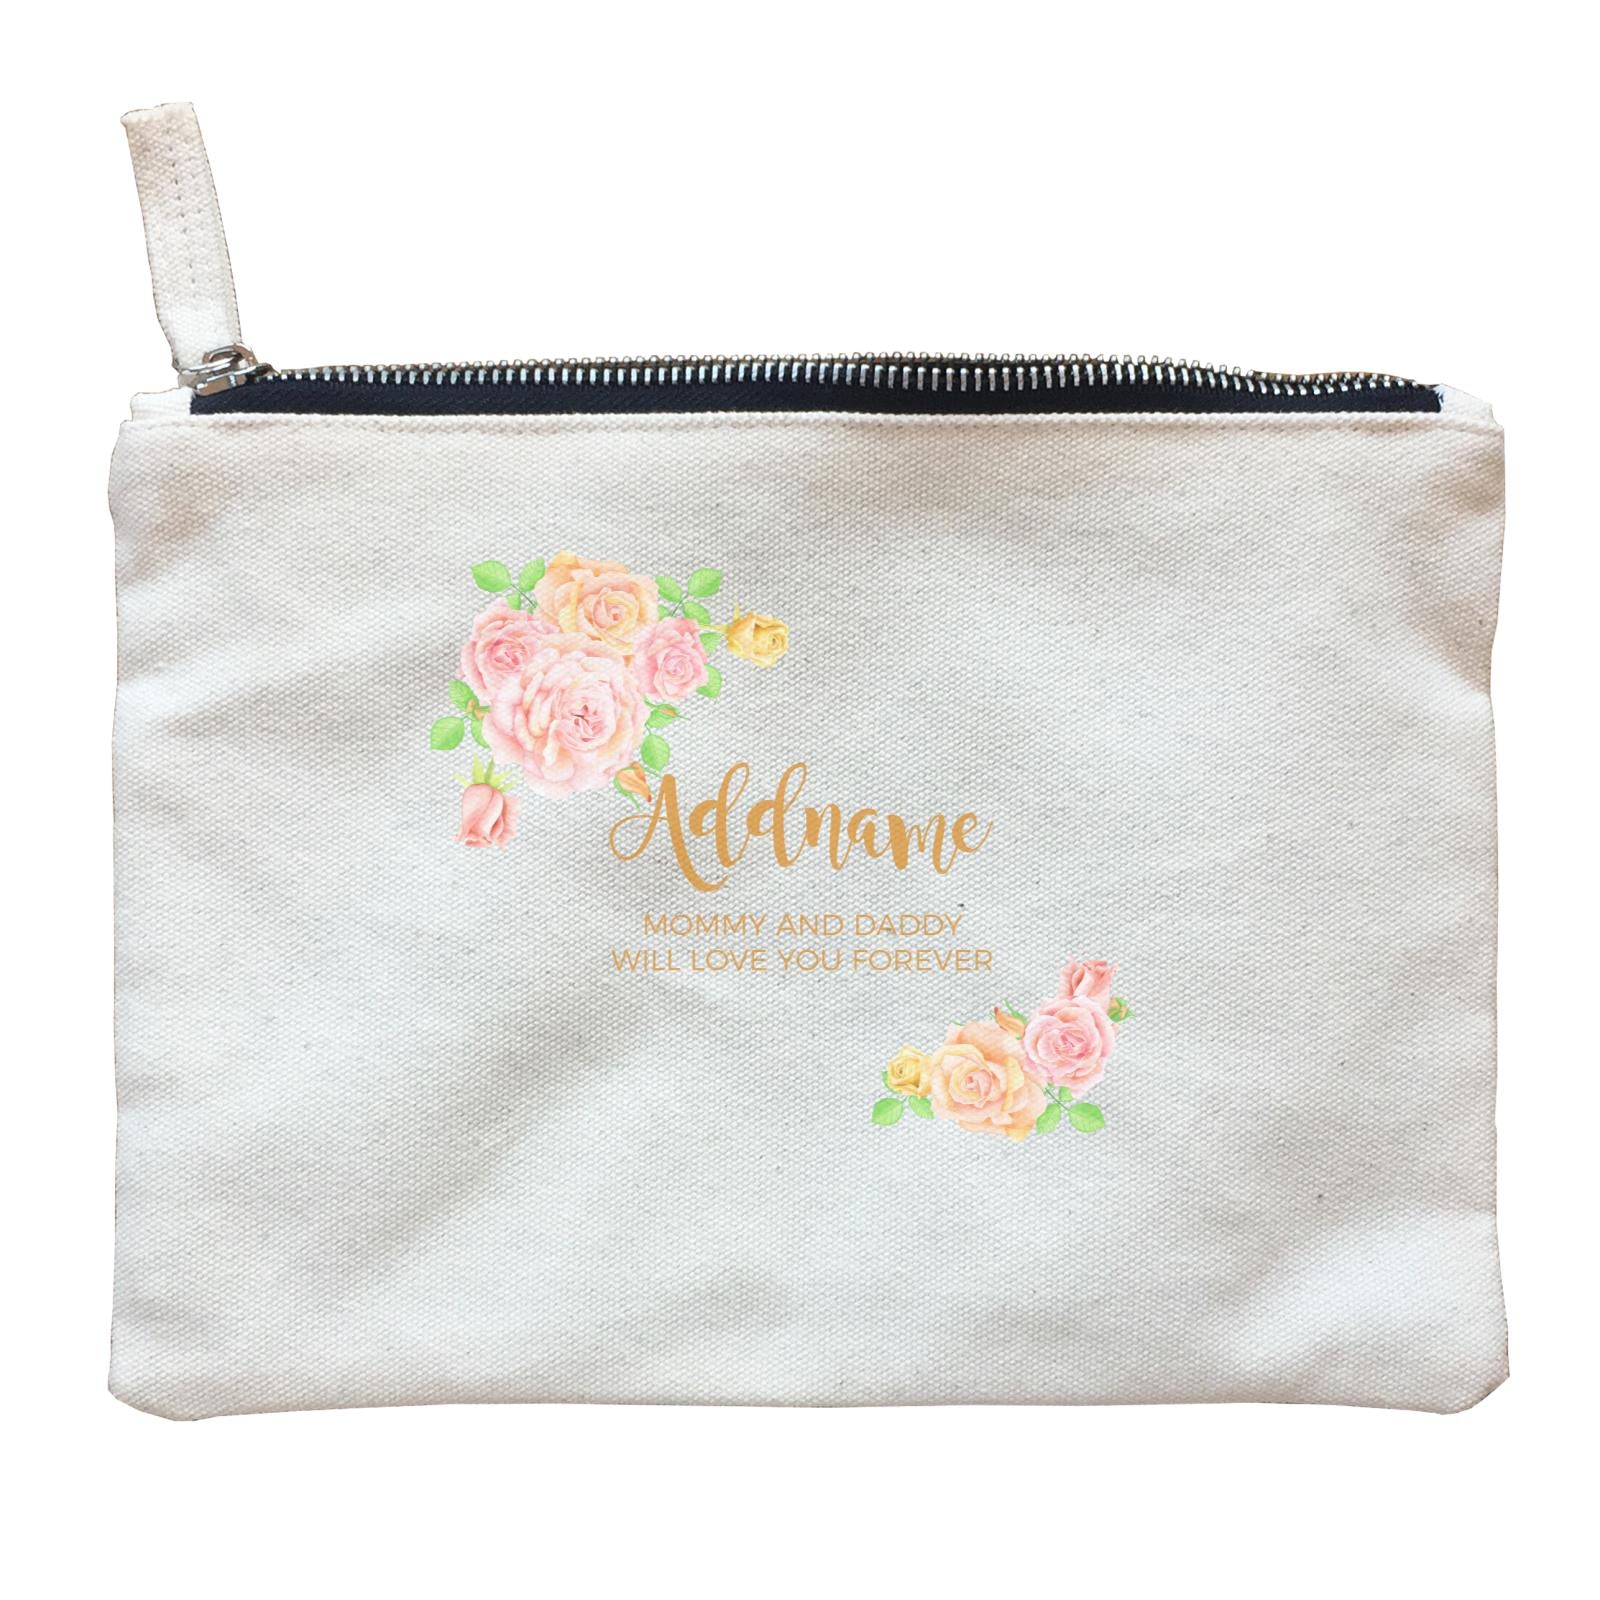 Sweet Rose Frame Personalisable with Name and Text Zipper Pouch